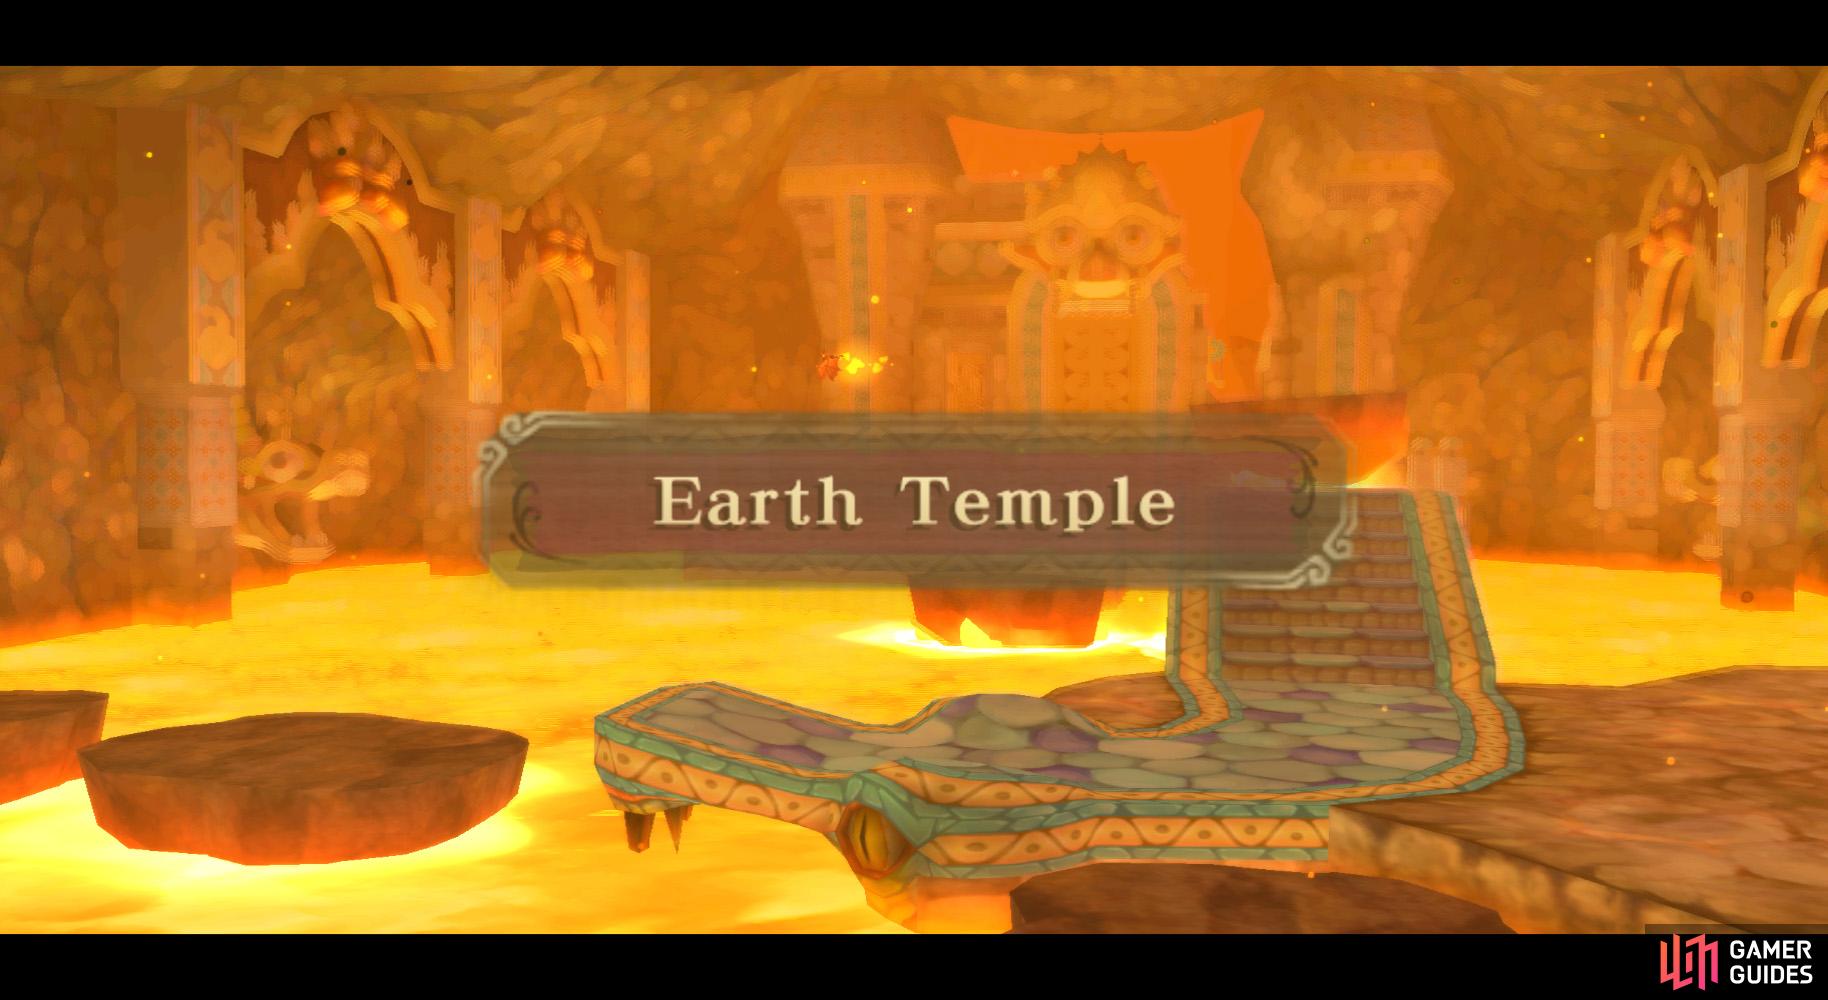 Welcome to the Fire, er, Earth Temple!